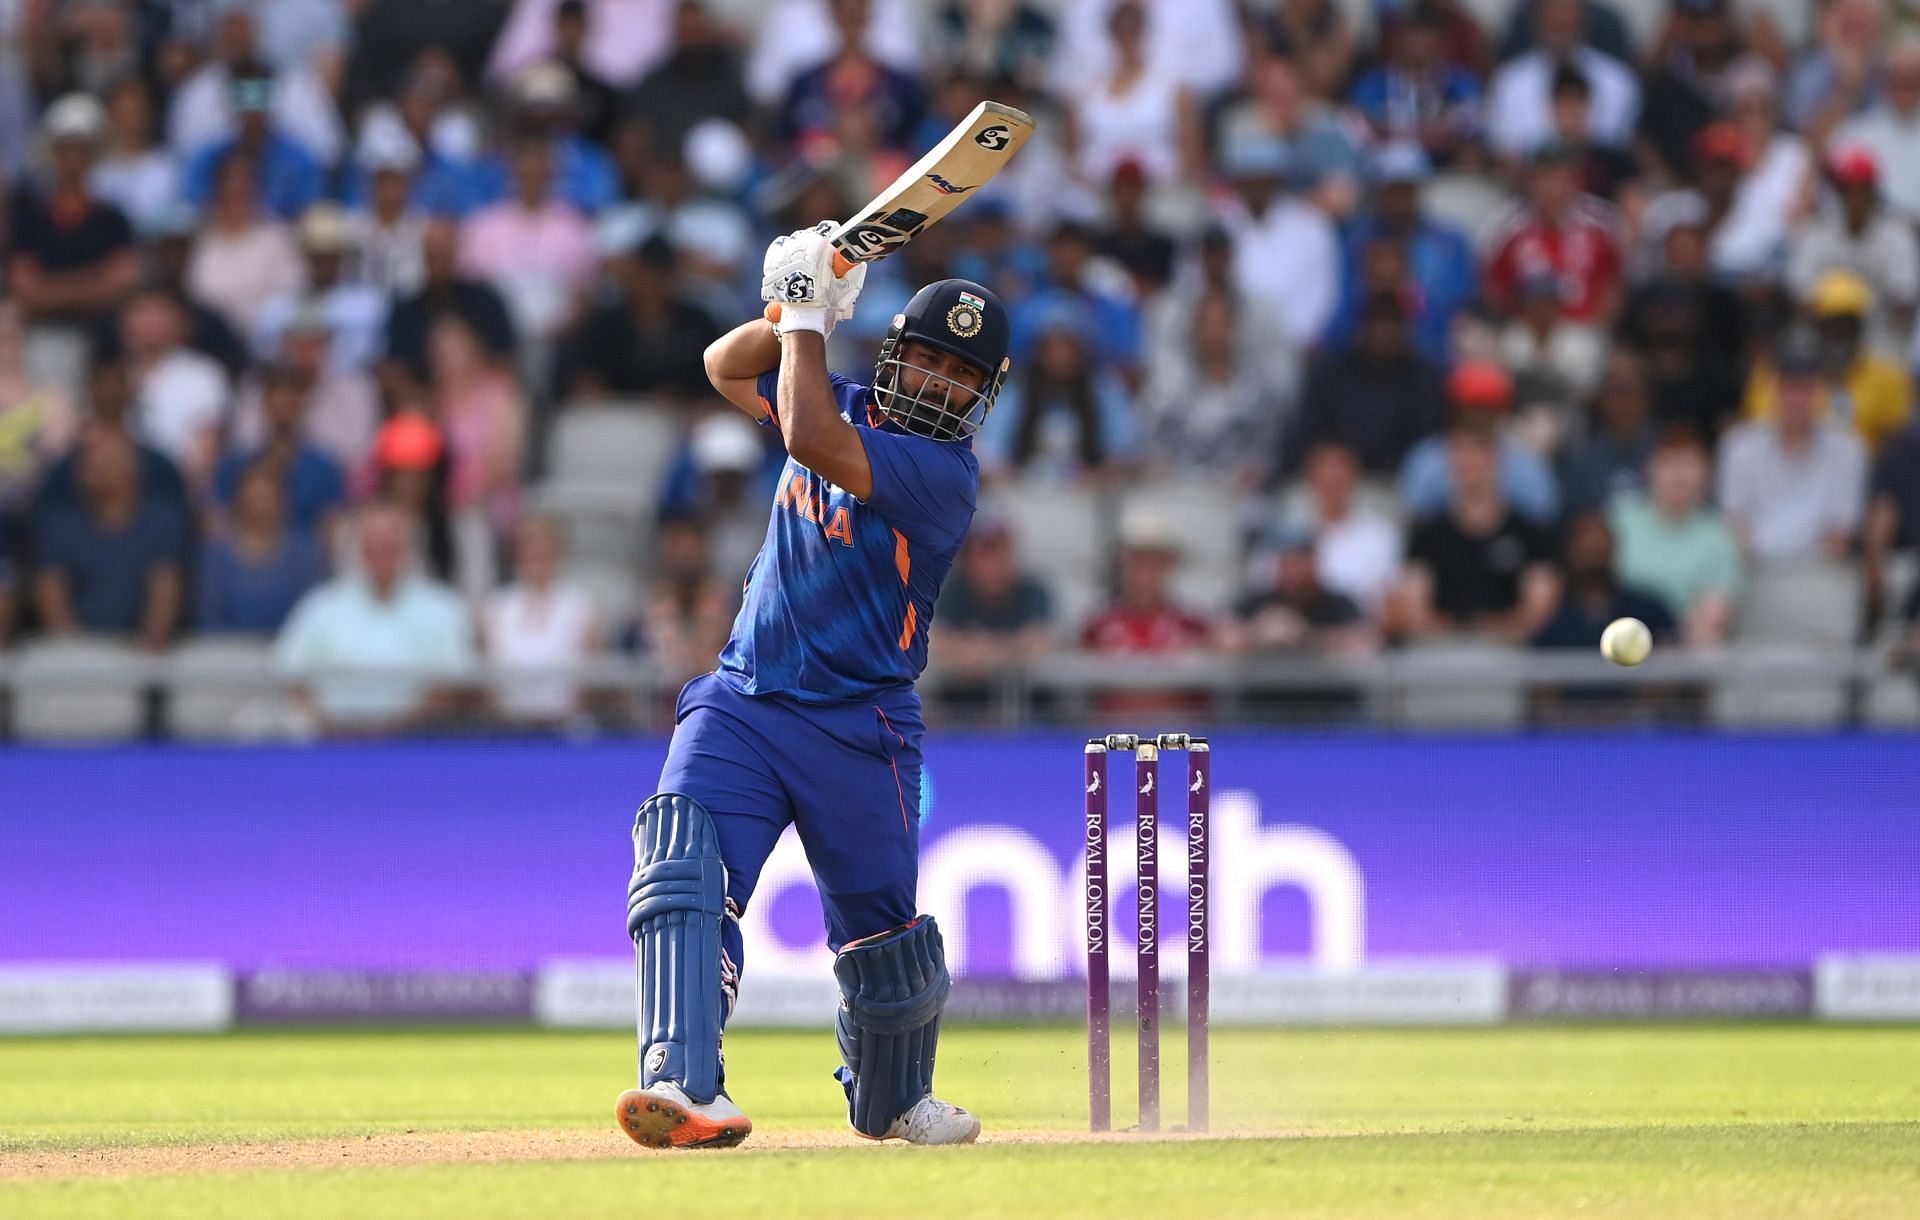 Rishabh Pant has not been at his best in T20I cricket